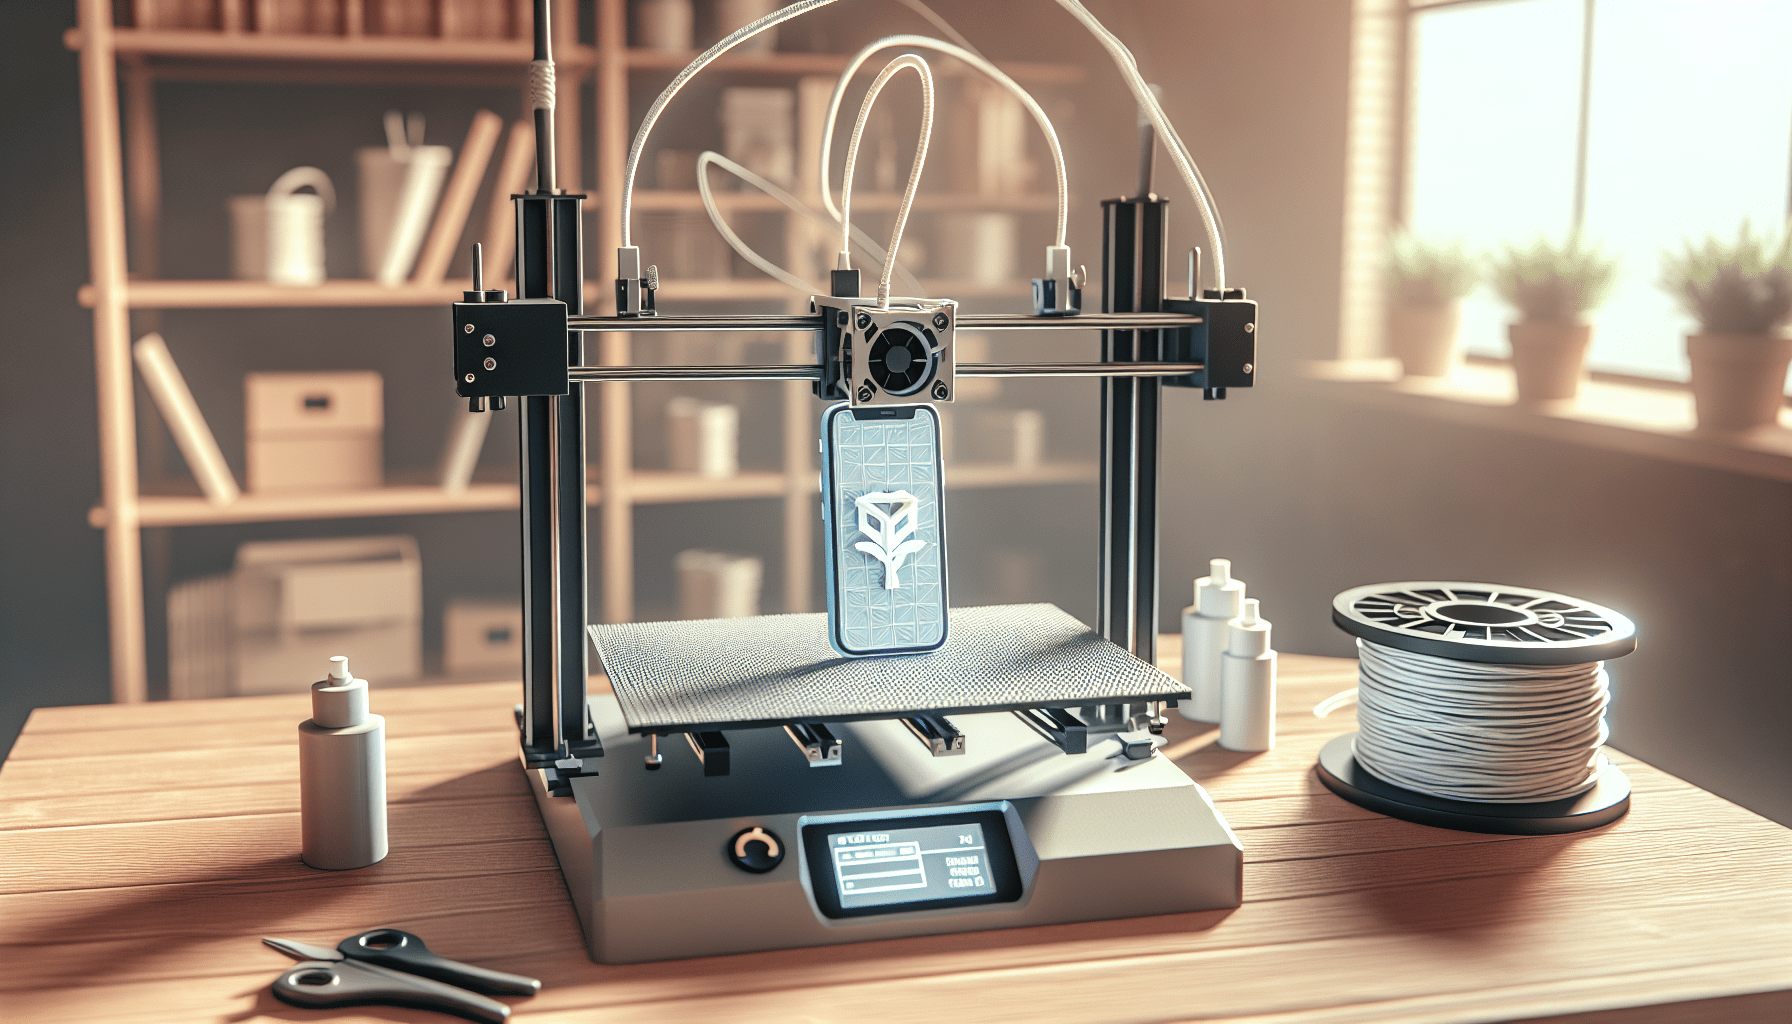 11-useful-things-to-3d-print-first-practical-prints-2023-1 11 USEFUL Things to 3D Print First - Practical Prints 2023